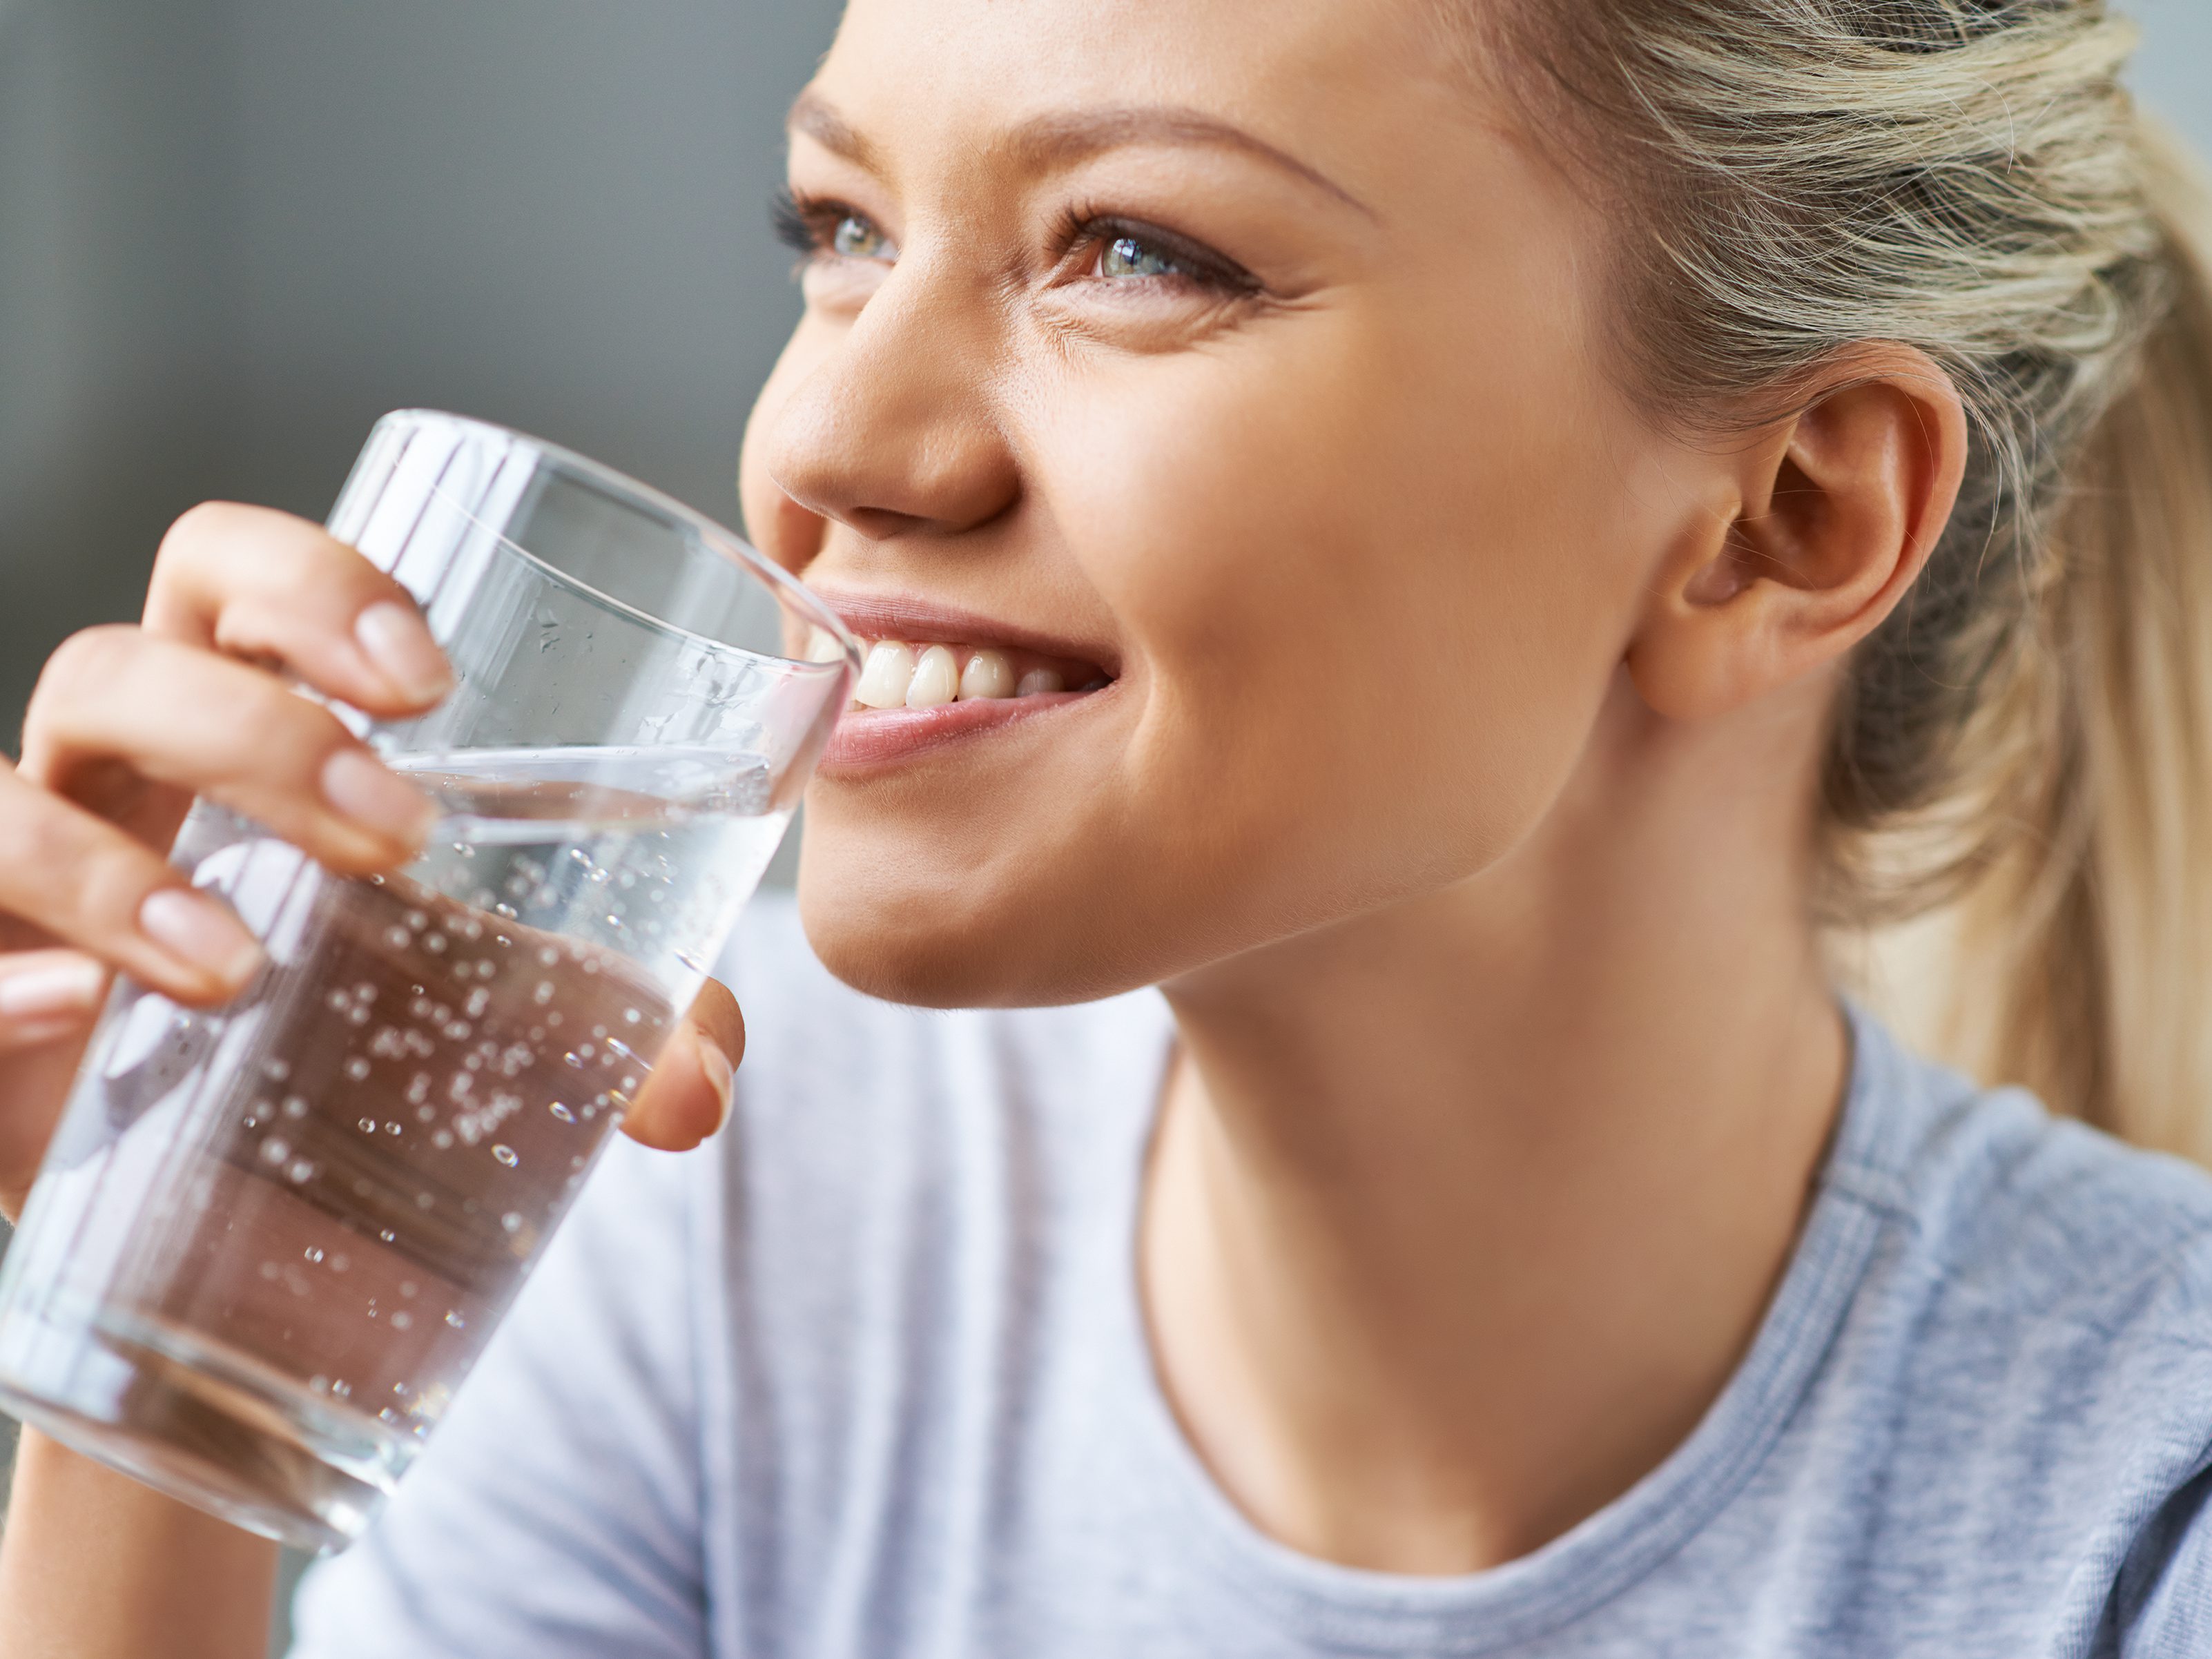 Can “harmonised” water really solve acne and eczema…?